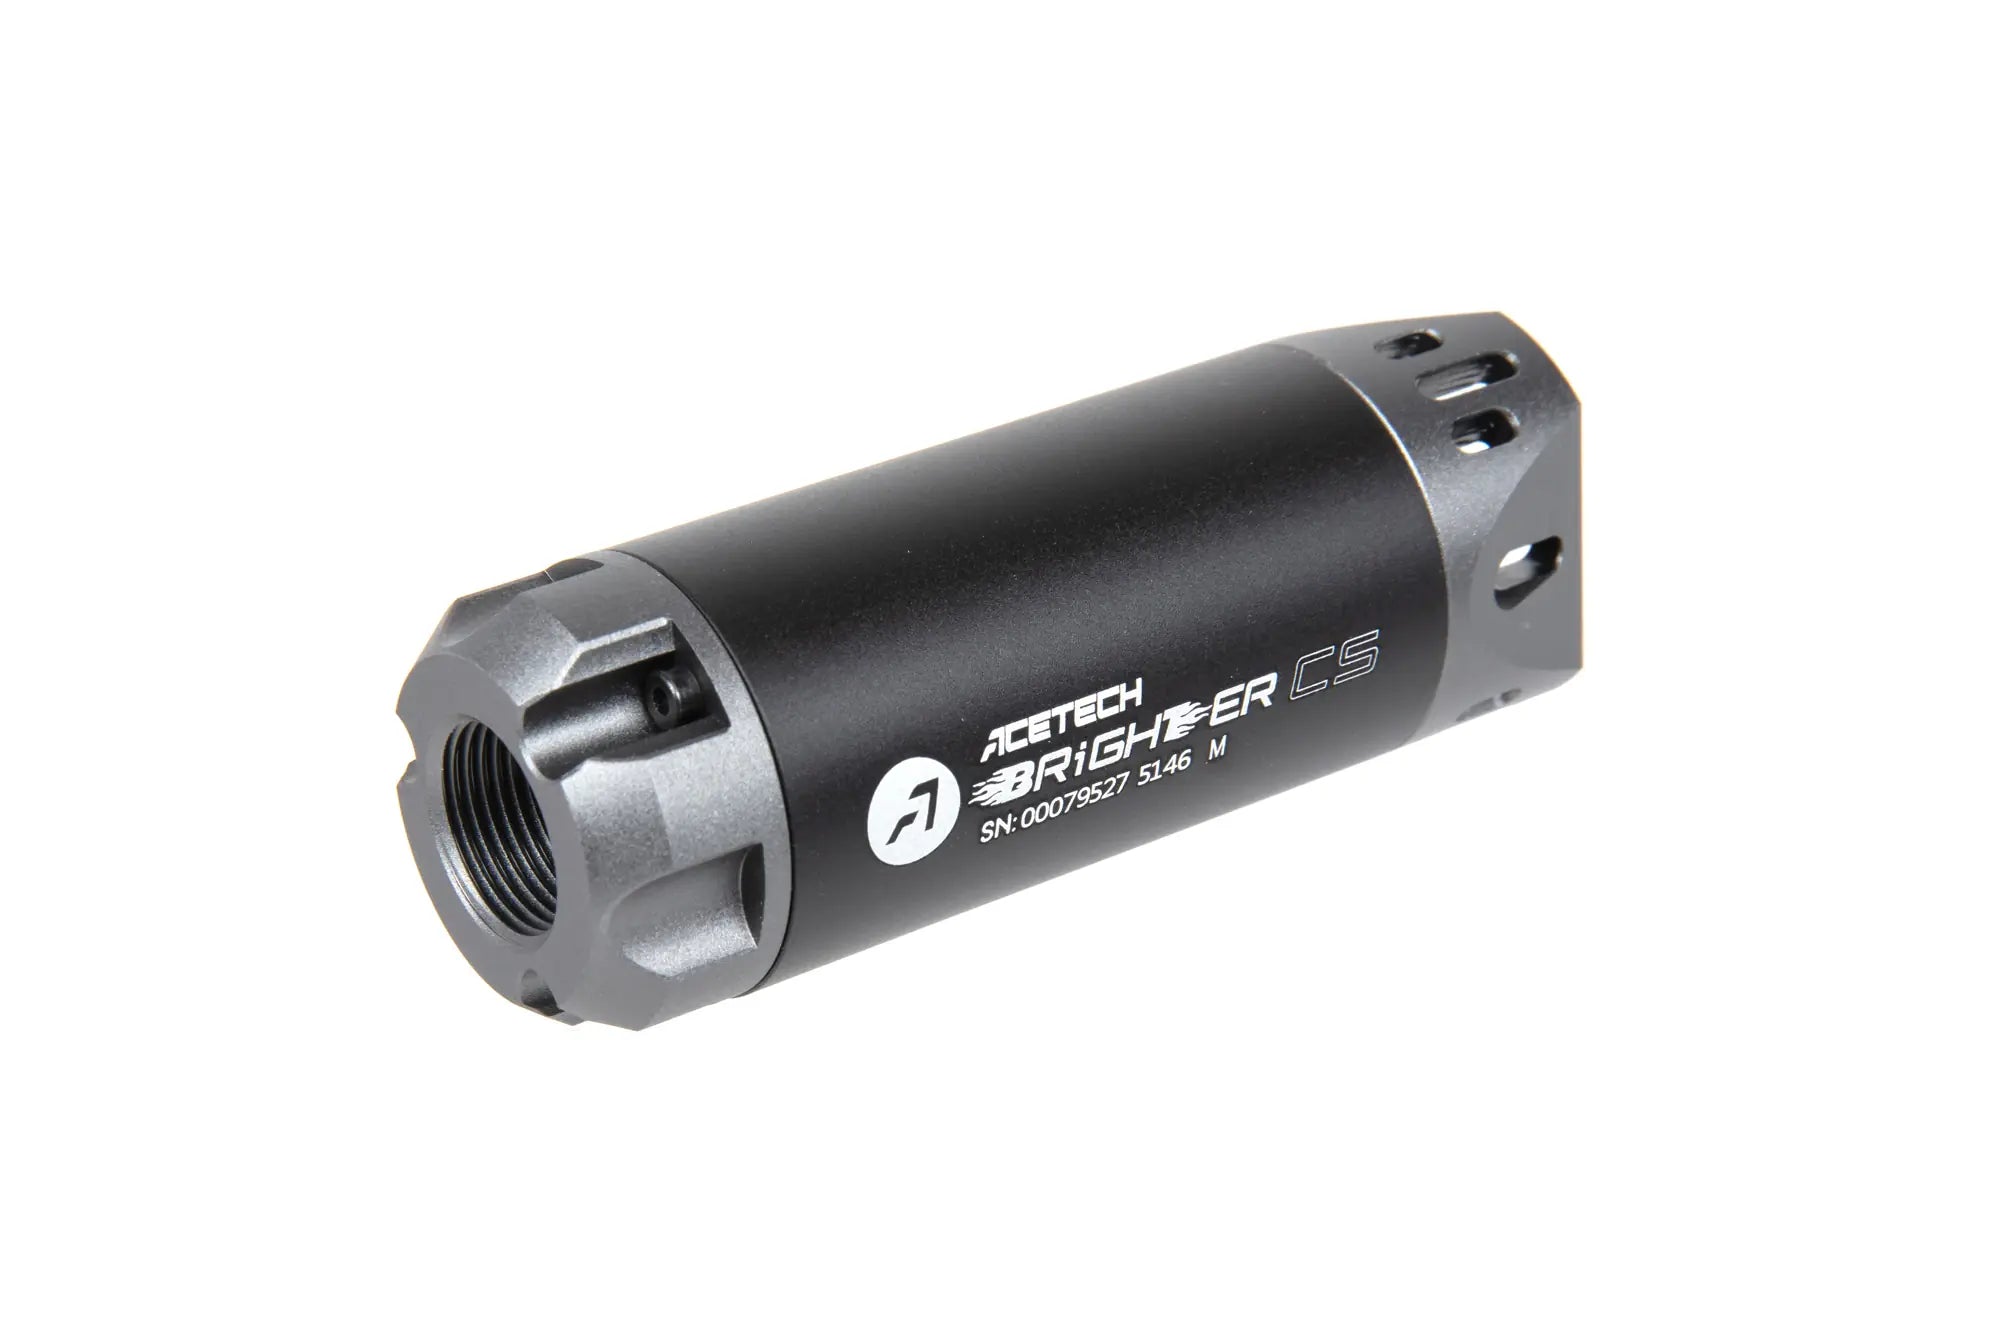 Tracer AceTech Brighter CS M14 CCW Grey Silencer